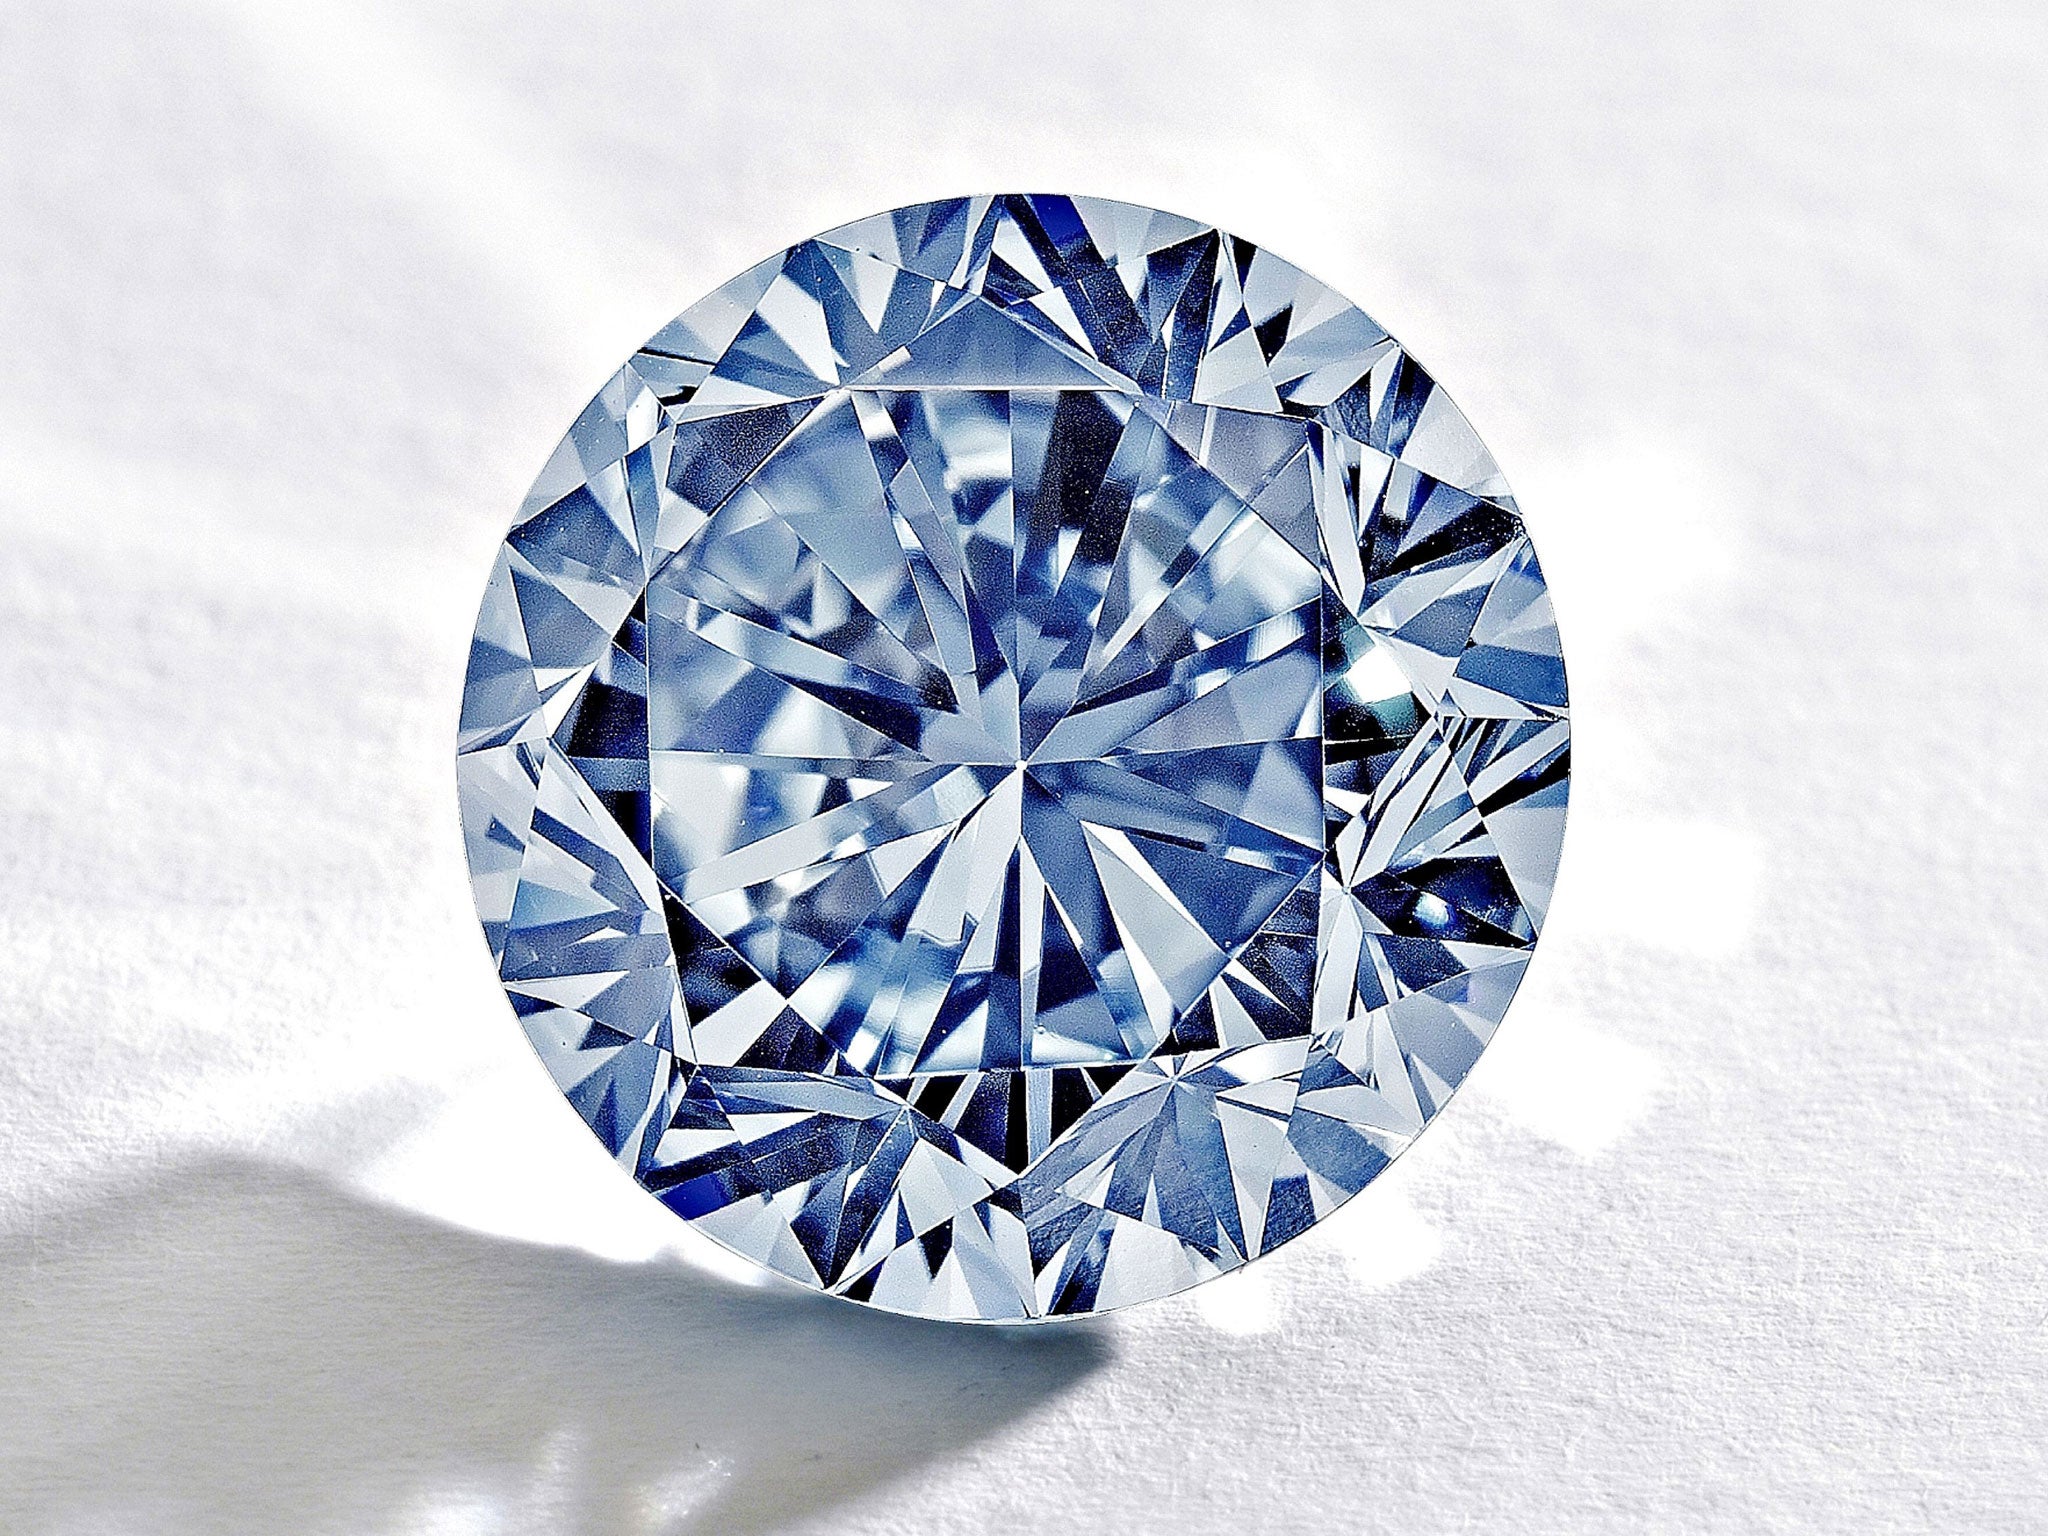 The rare round blue diamond will go under the hammer in Hong Kong in October